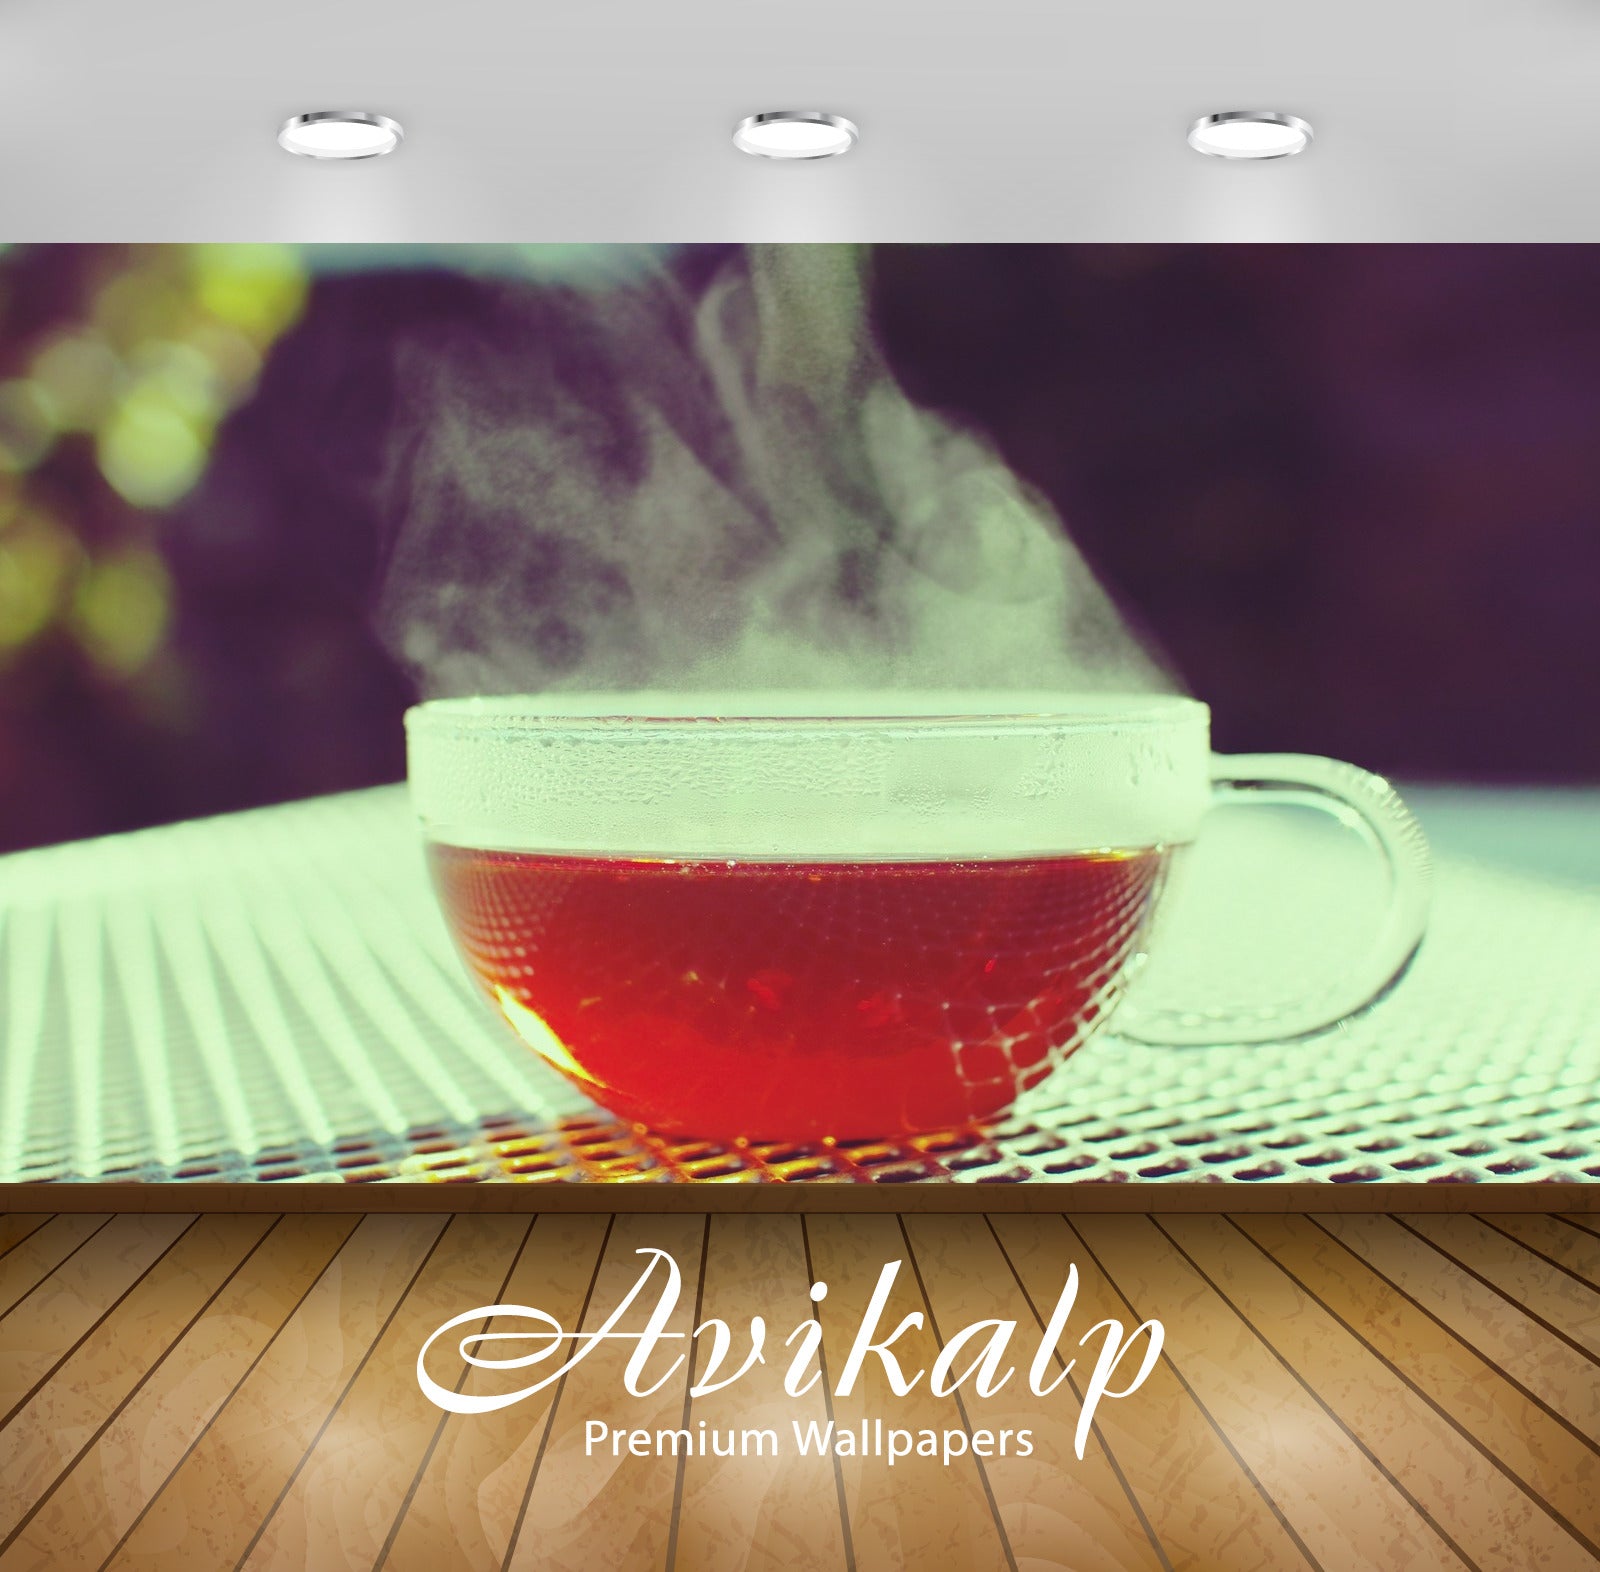 Avikalp Exclusive A Cup Of Tea AWI1061 HD Wallpapers for Living room, Hall, Kids Room, Kitchen, TV B